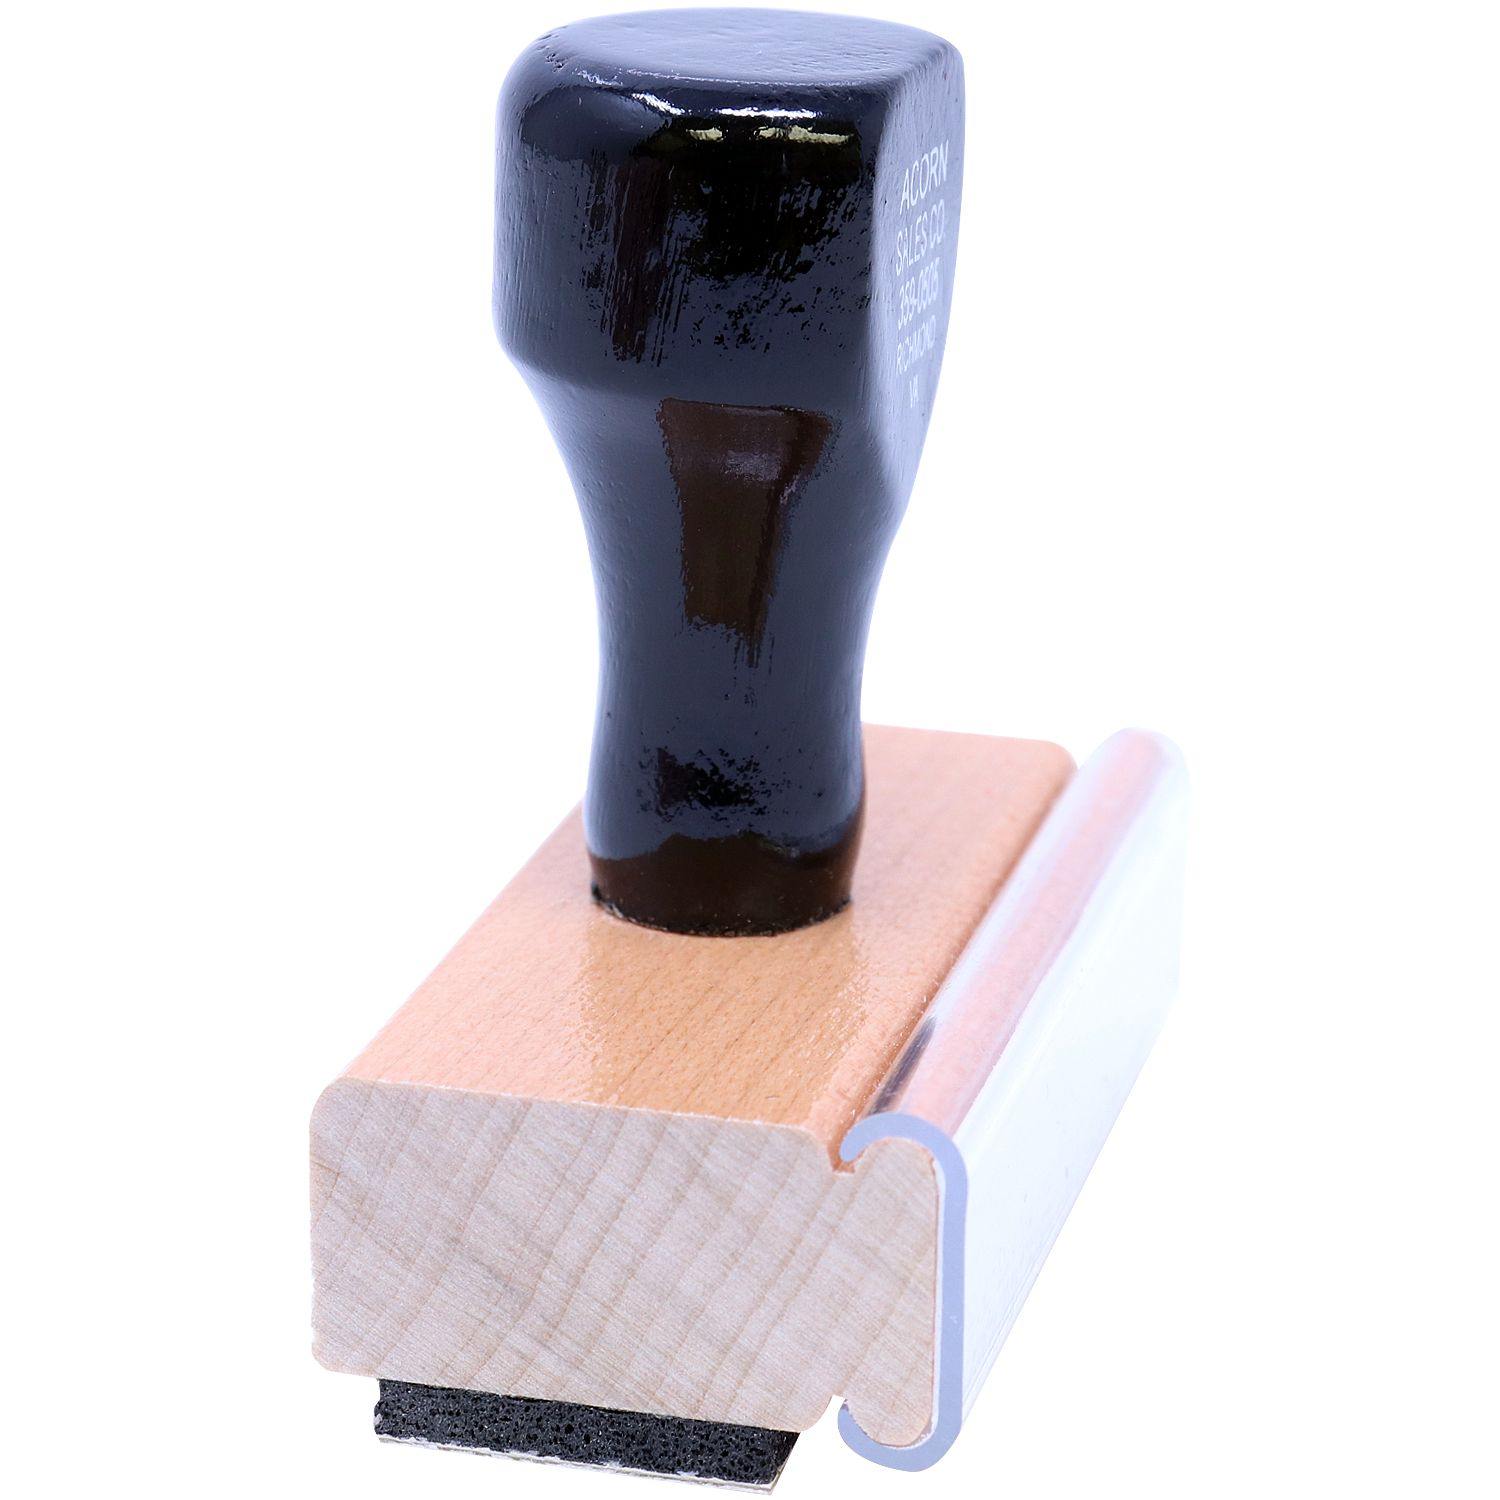 Mailed with Date Line Rubber Stamp - Engineer Seal Stamps - Brand_Acorn, Impression Size_Small, Stamp Type_Regular Stamp, Type of Use_Office, Type of Use_Postal & Mailing